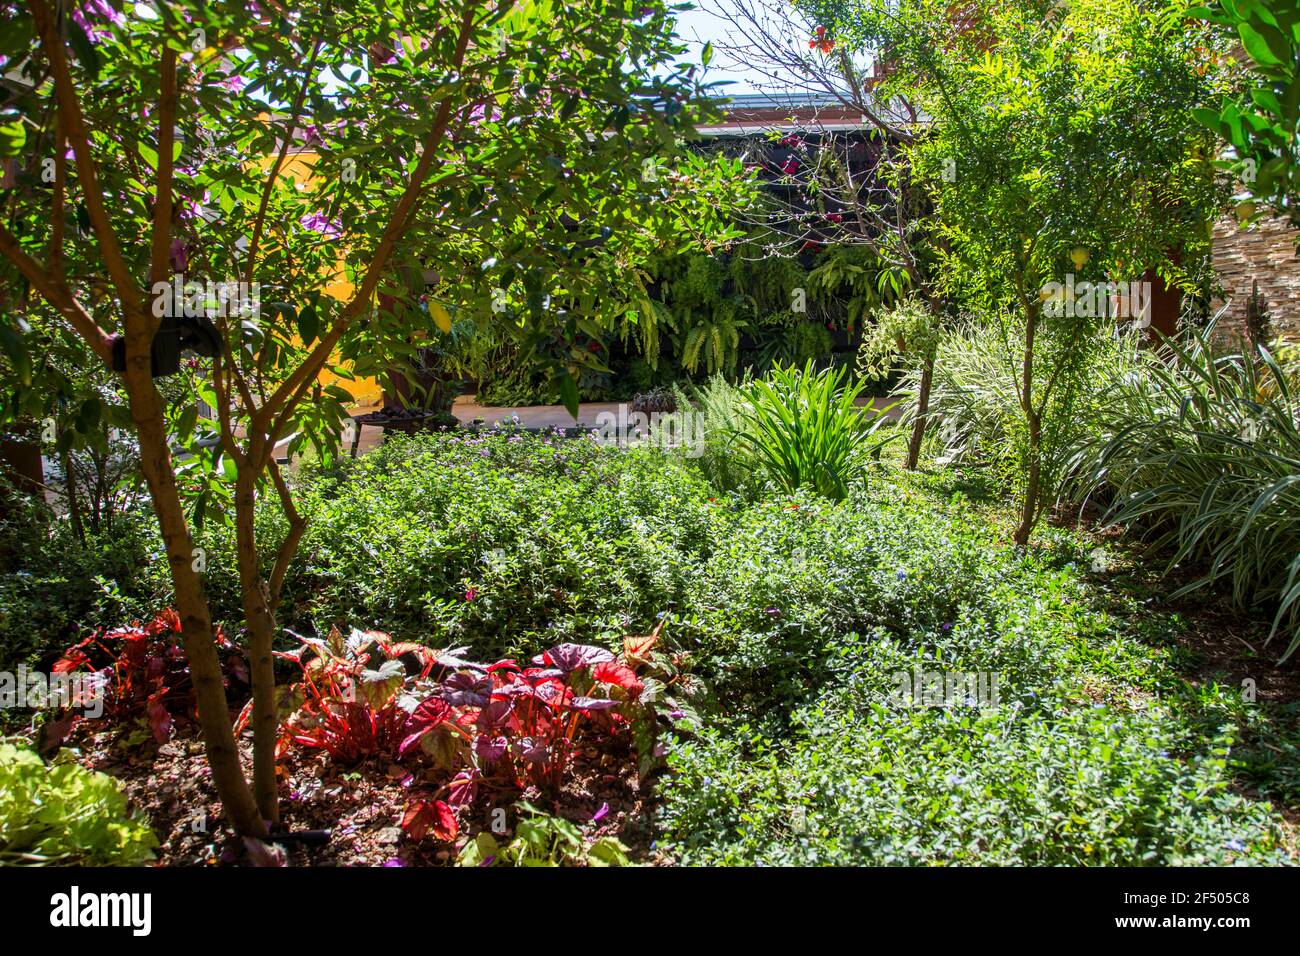 flowers and plants in a residential garden   Jundiai, Sao Paulo, Brazil Stock Photo